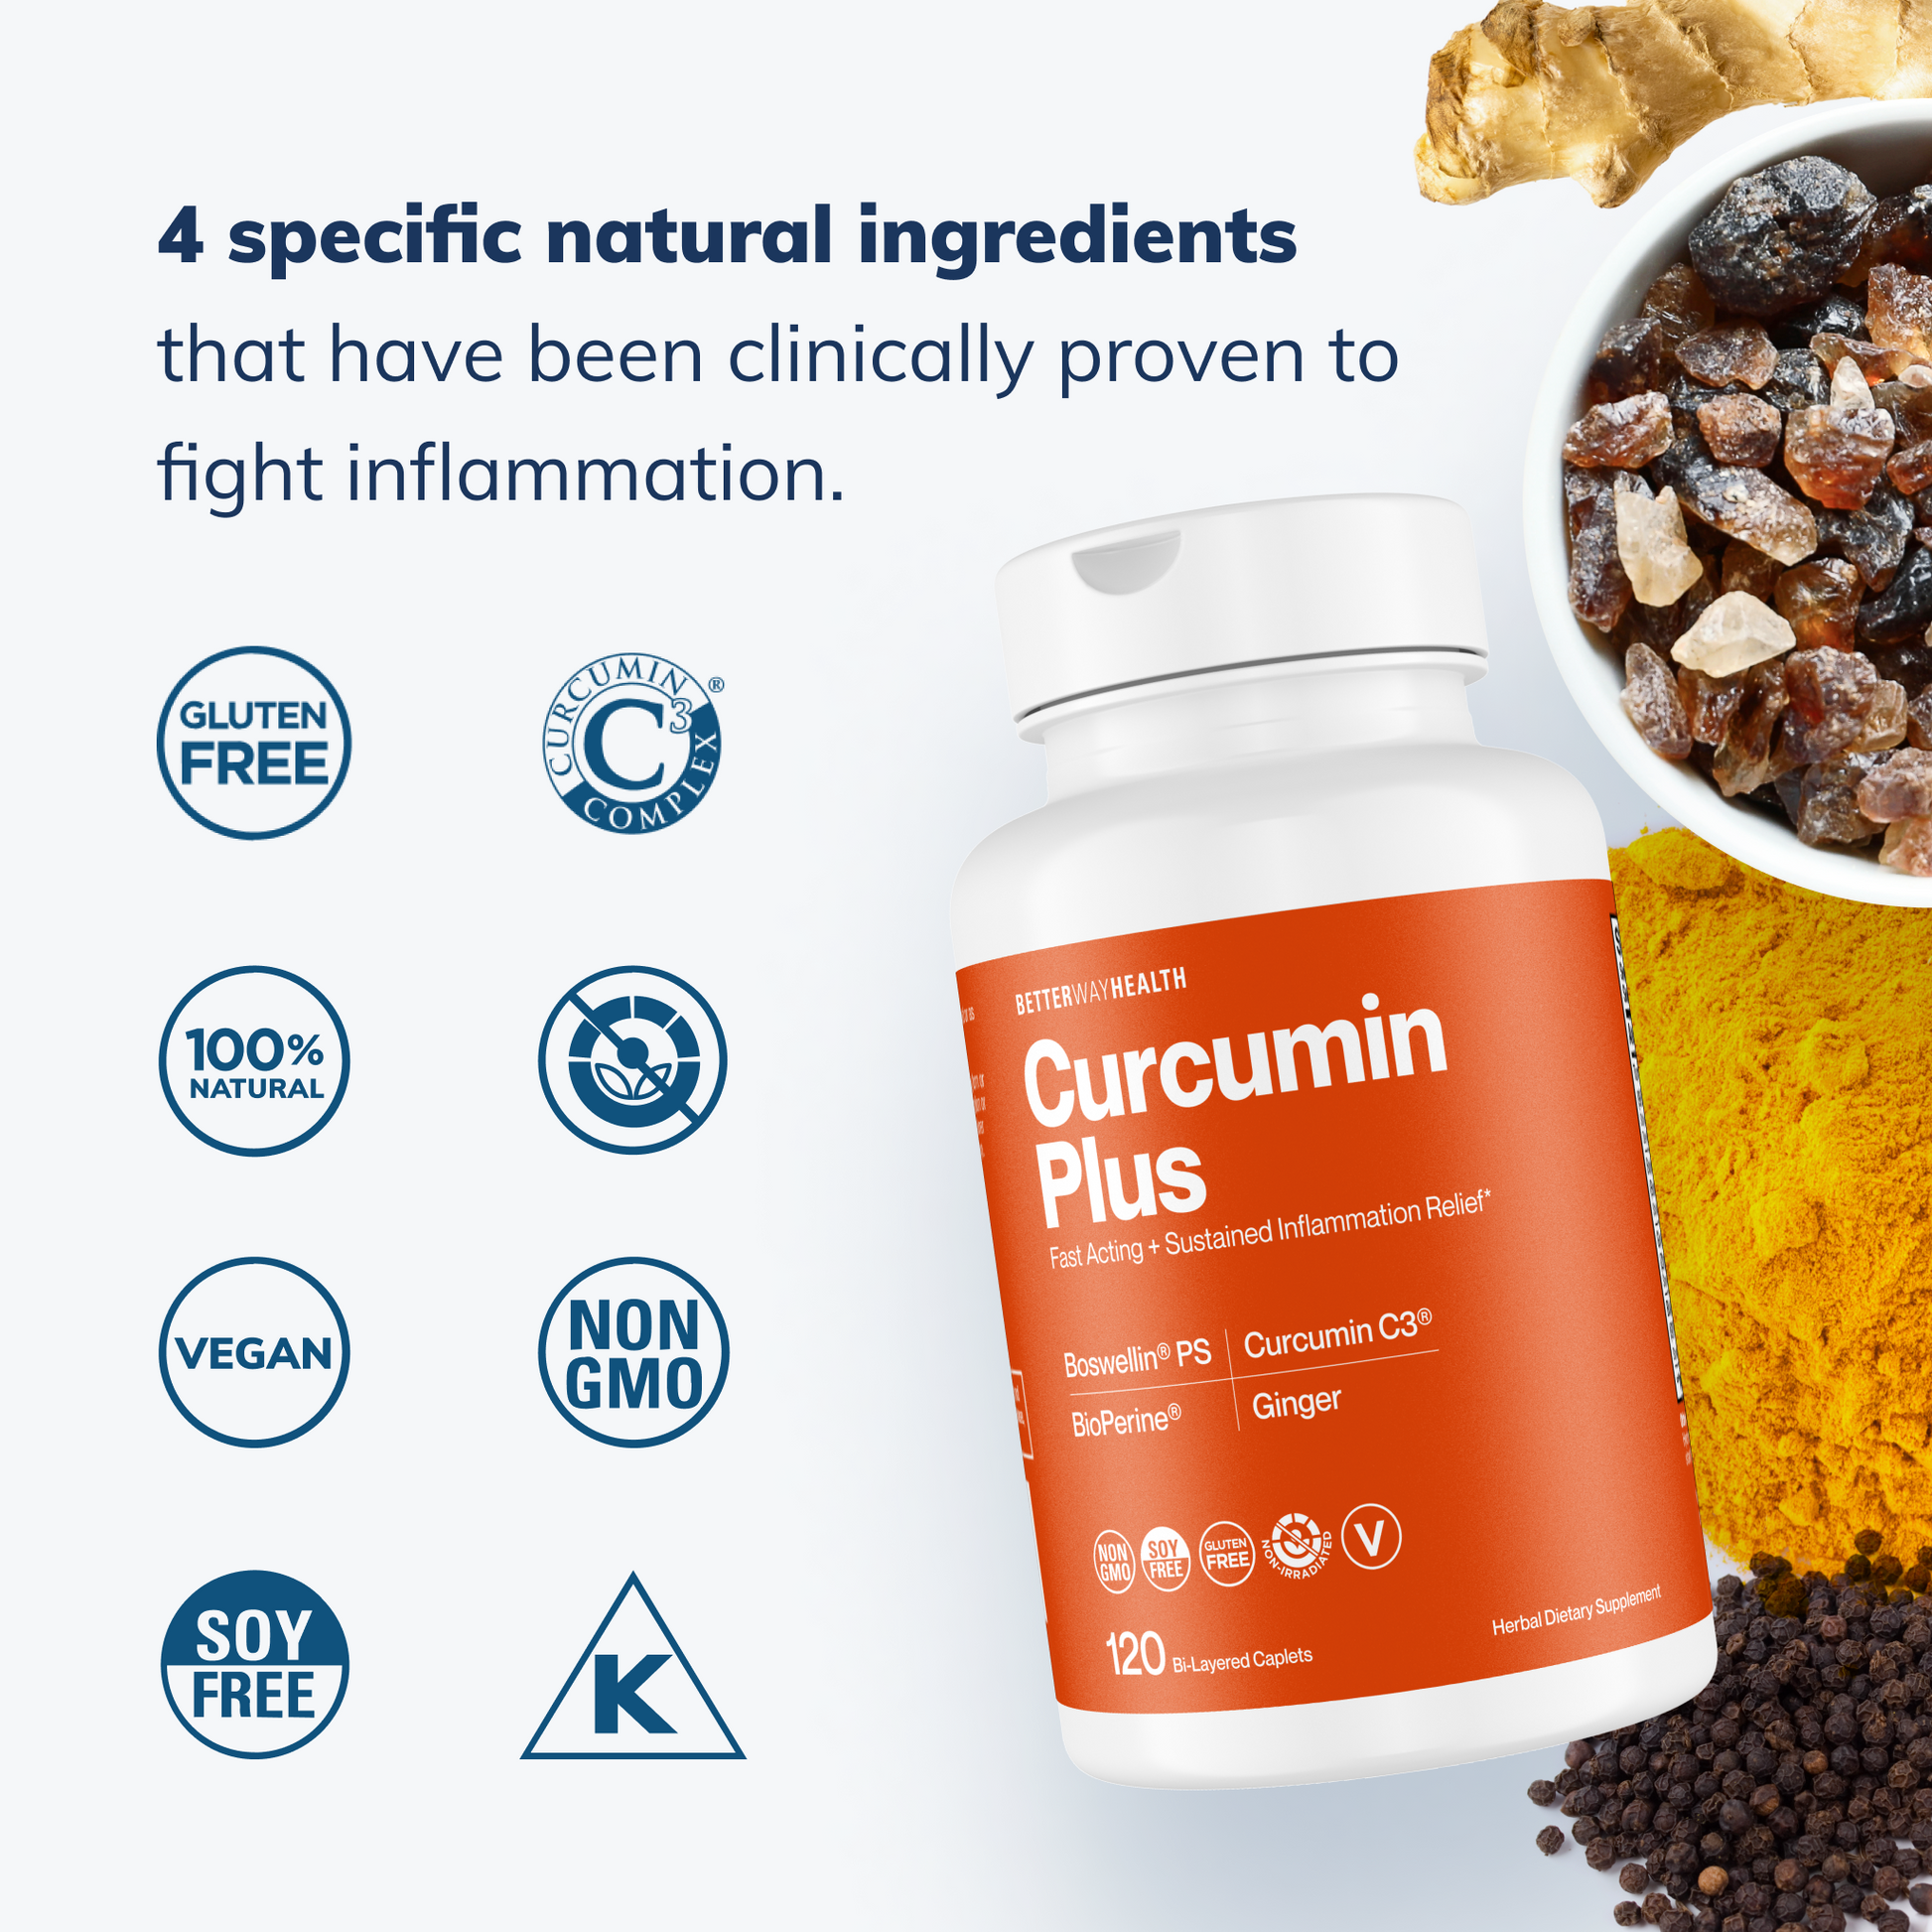 infographic showing 4 natural ingredients in curcumin plus 